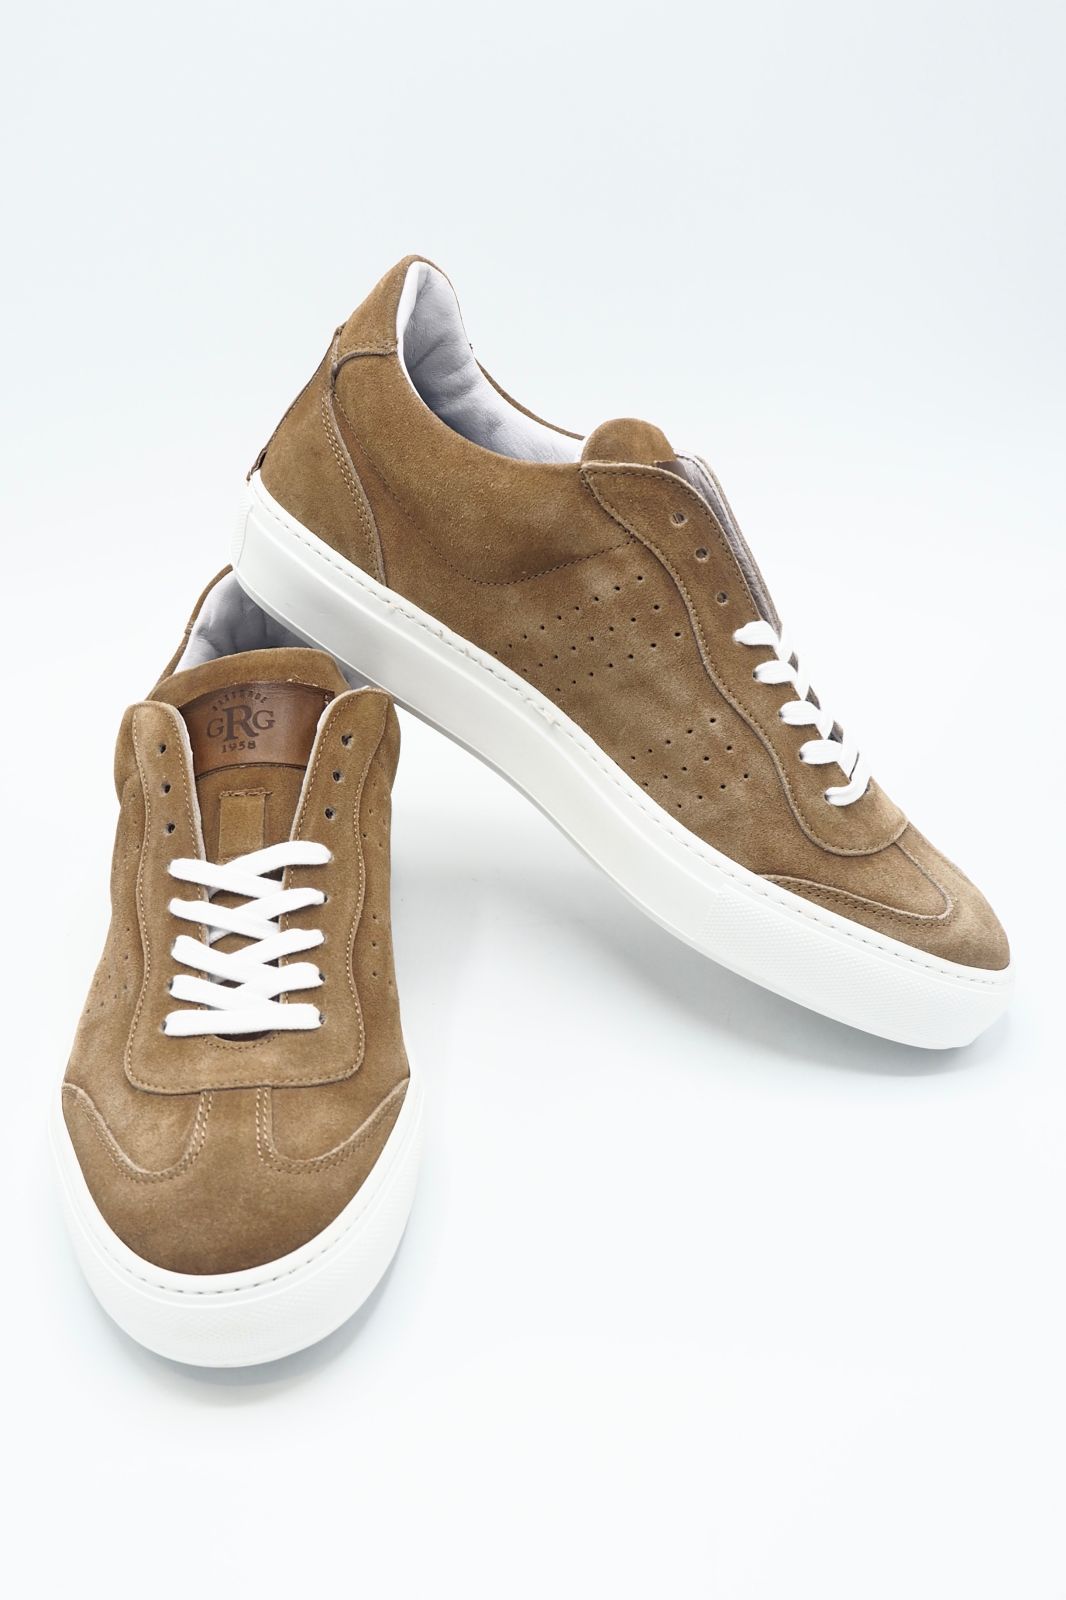 Giorgio 1958 basket bas Naturel hommes (GG1958-Bask. Vintage - 980105 Bask. croute camel) - Marine | Much more than shoes